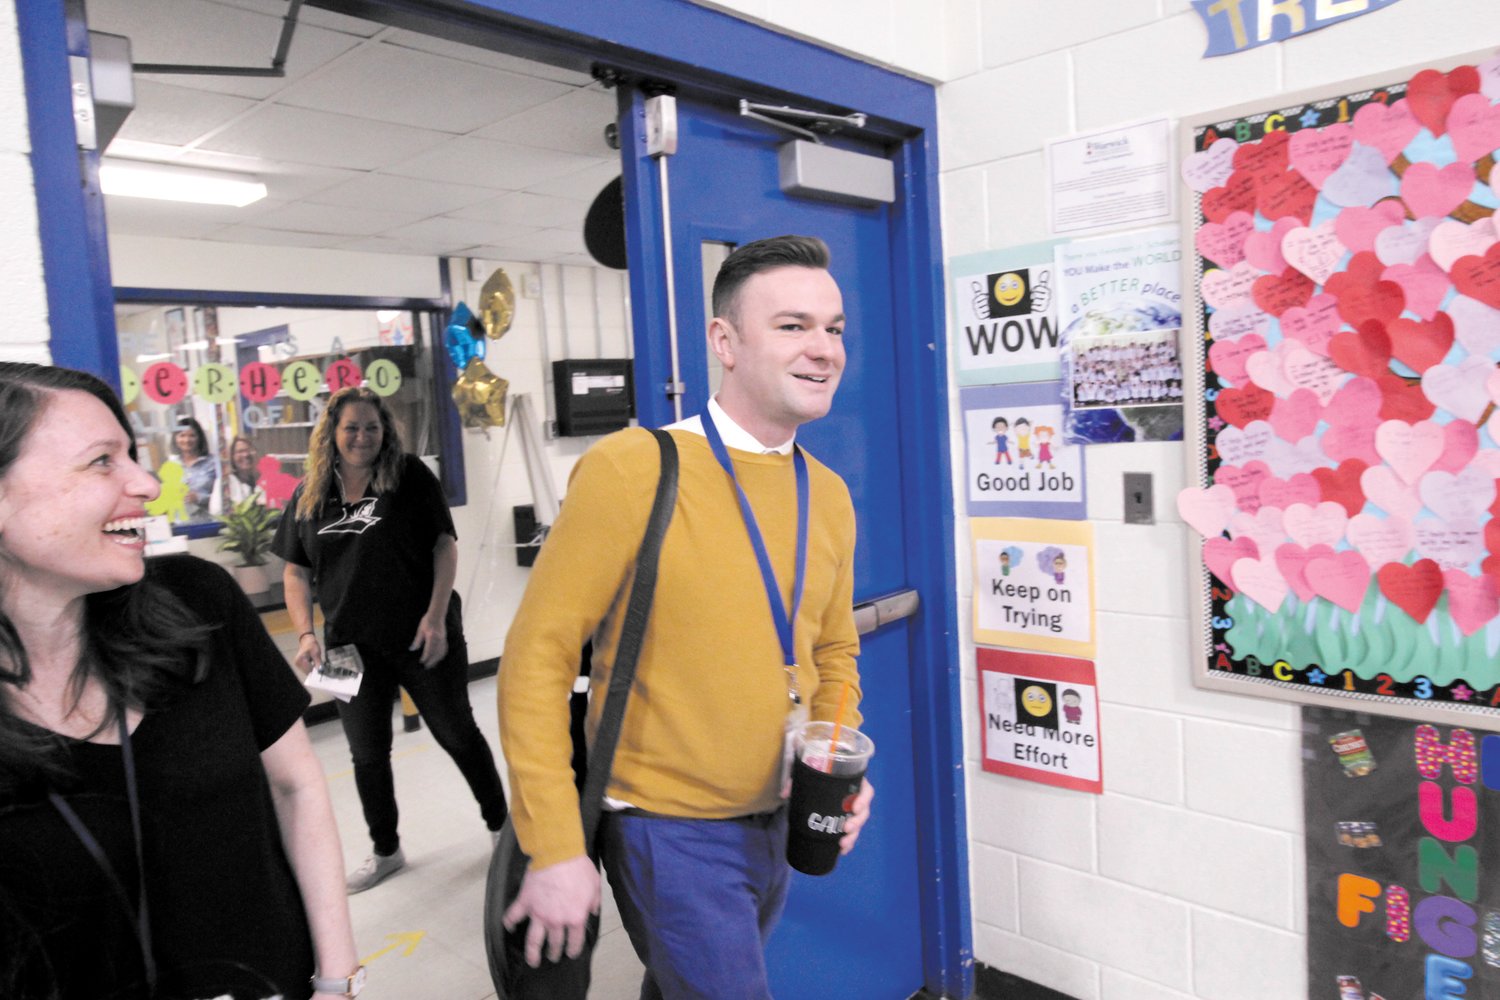 PICKED AS THE BEST:  With Galligan looking on, Robert Littlefield ,  director of  the Rhode Island Association of School Principals  told of the rigorous review that went into naming the state’s Outsanding First Principal of the Year.